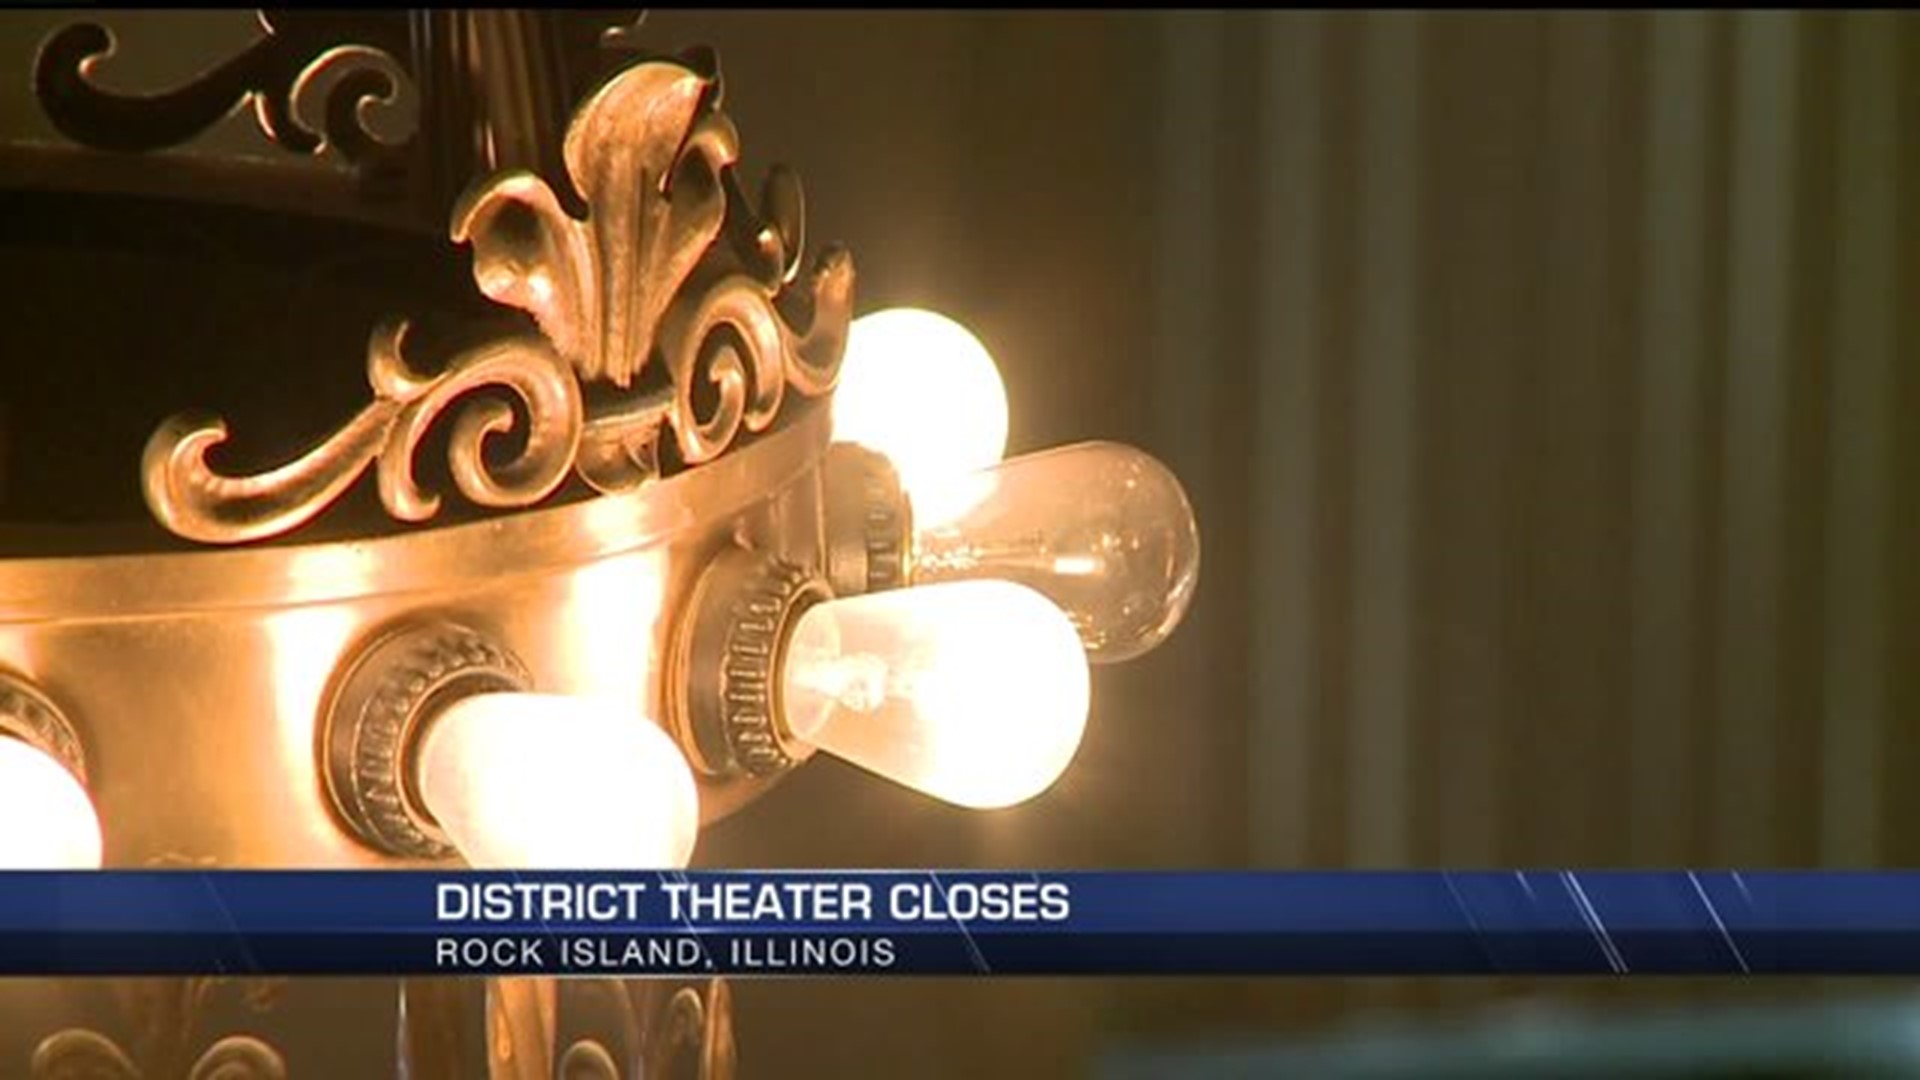 District Theater in Rock Island closes